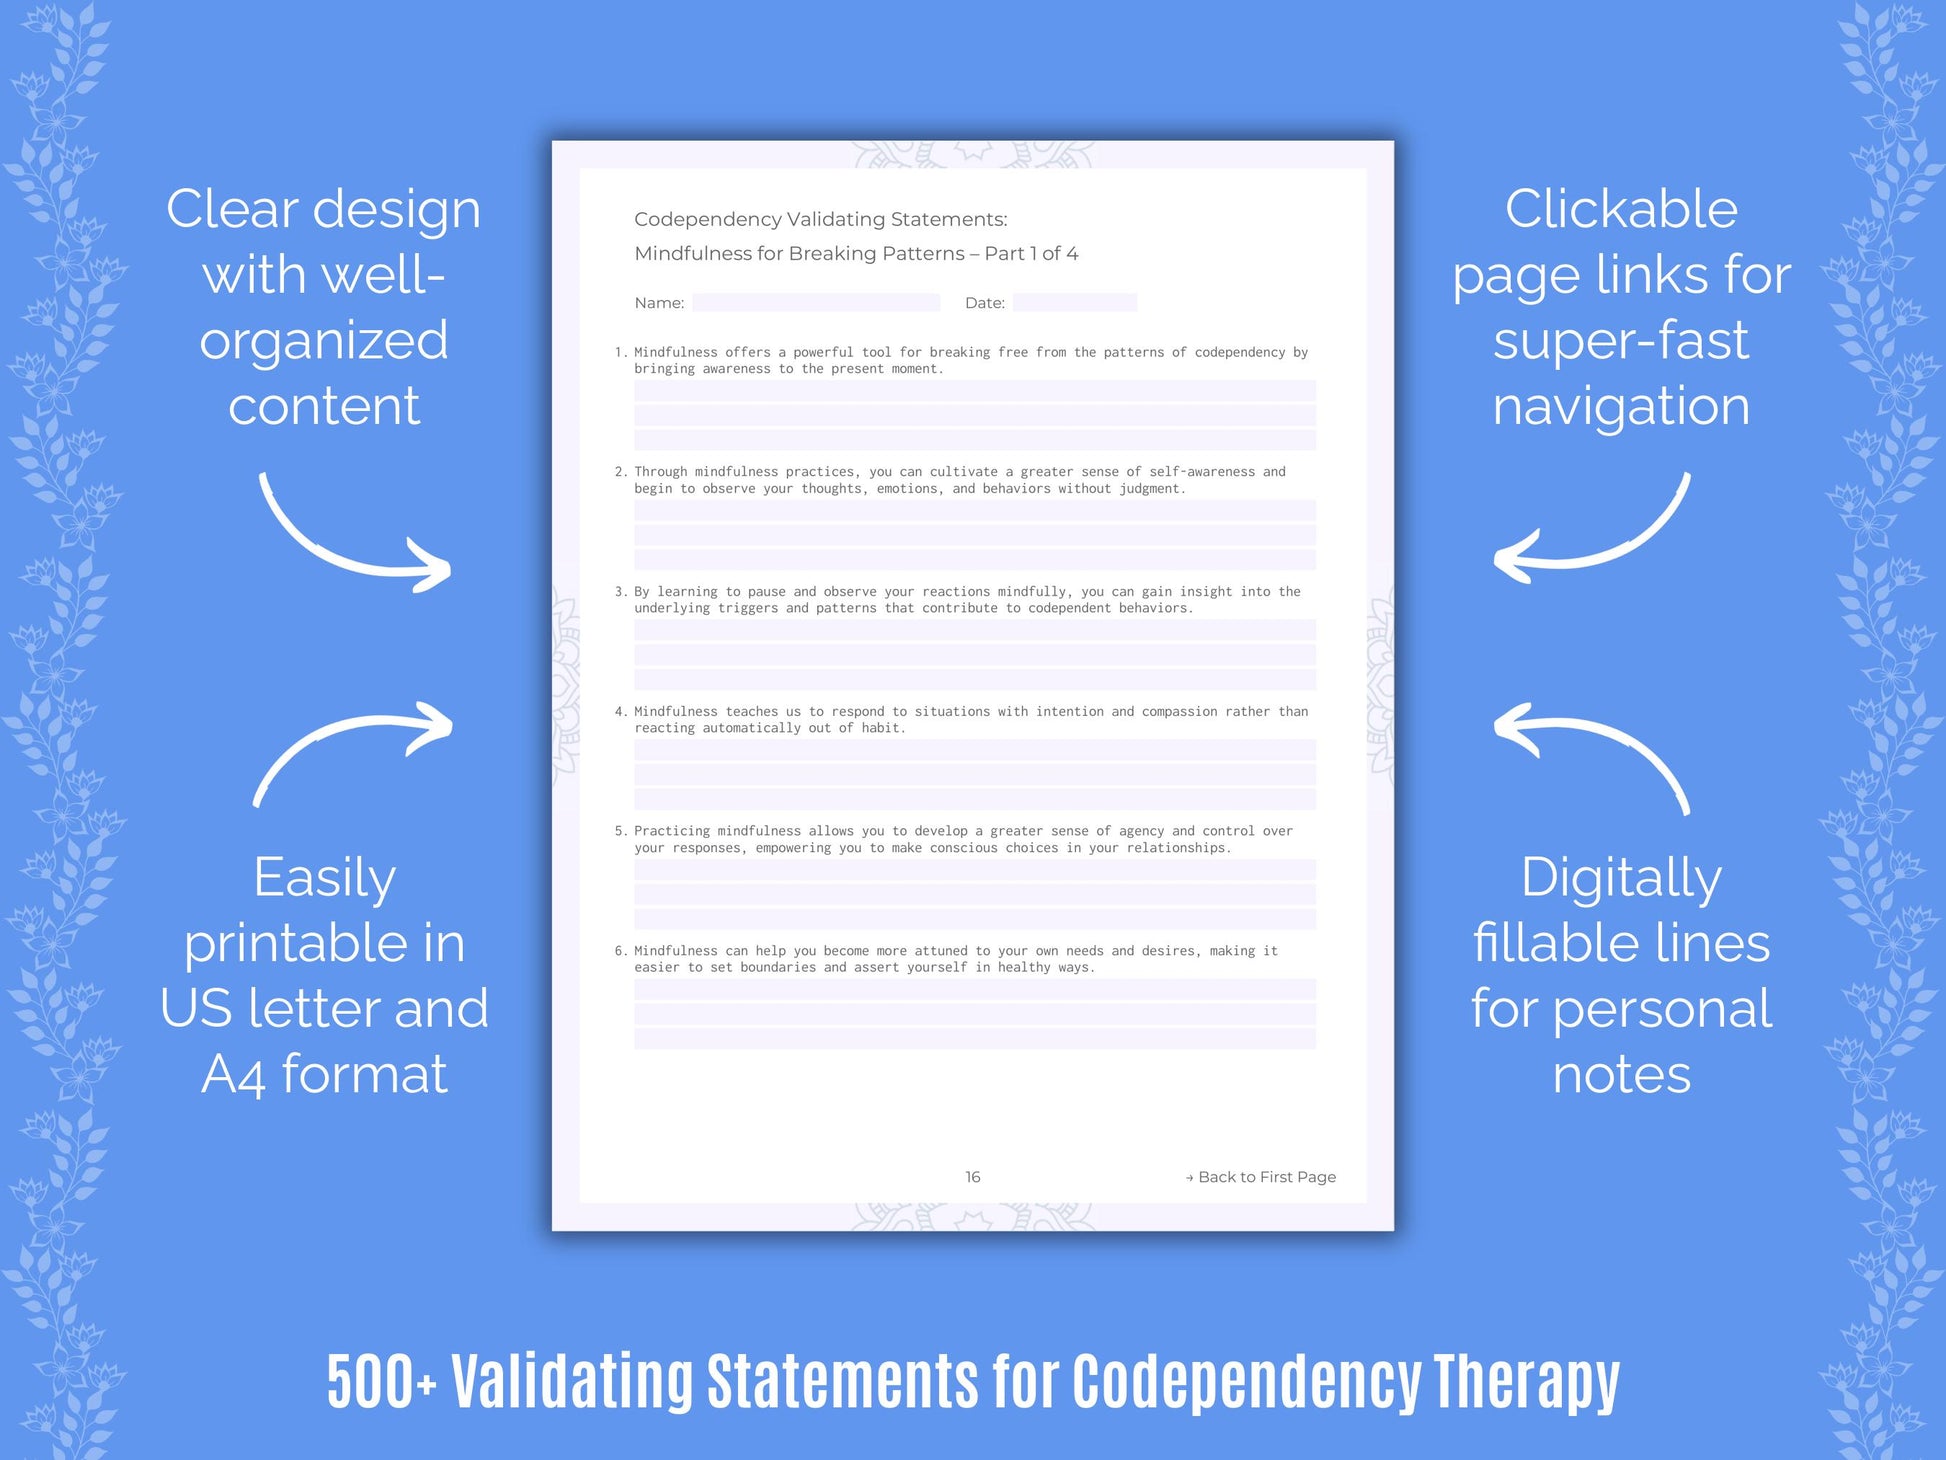 Codependency Validating Therapy Statements Resource